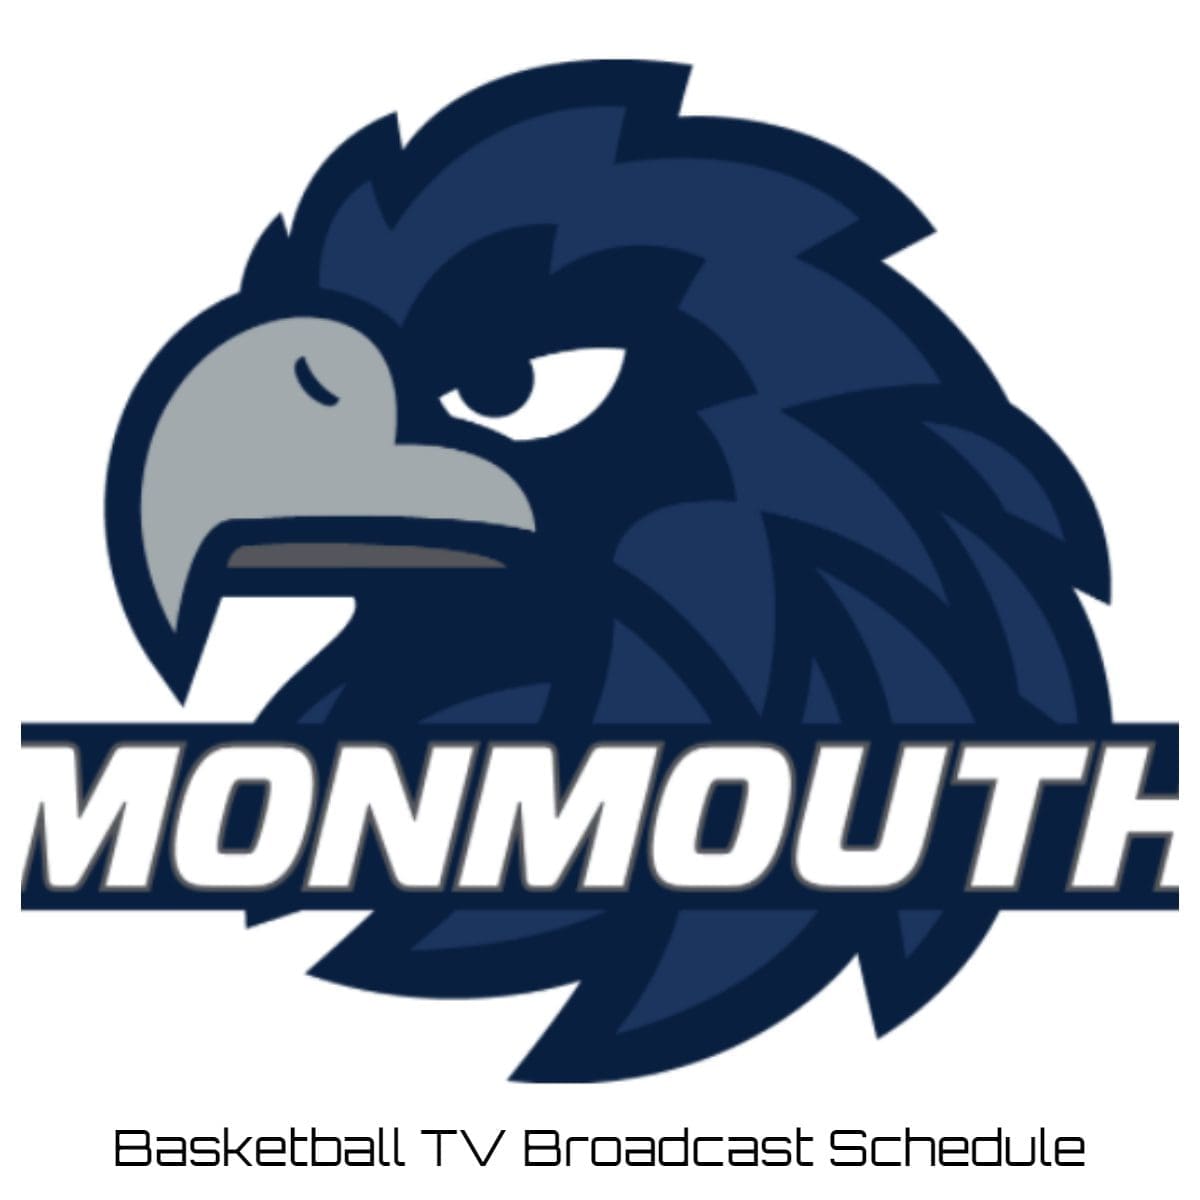 Monmouth Hawks Basketball TV Broadcast Schedule